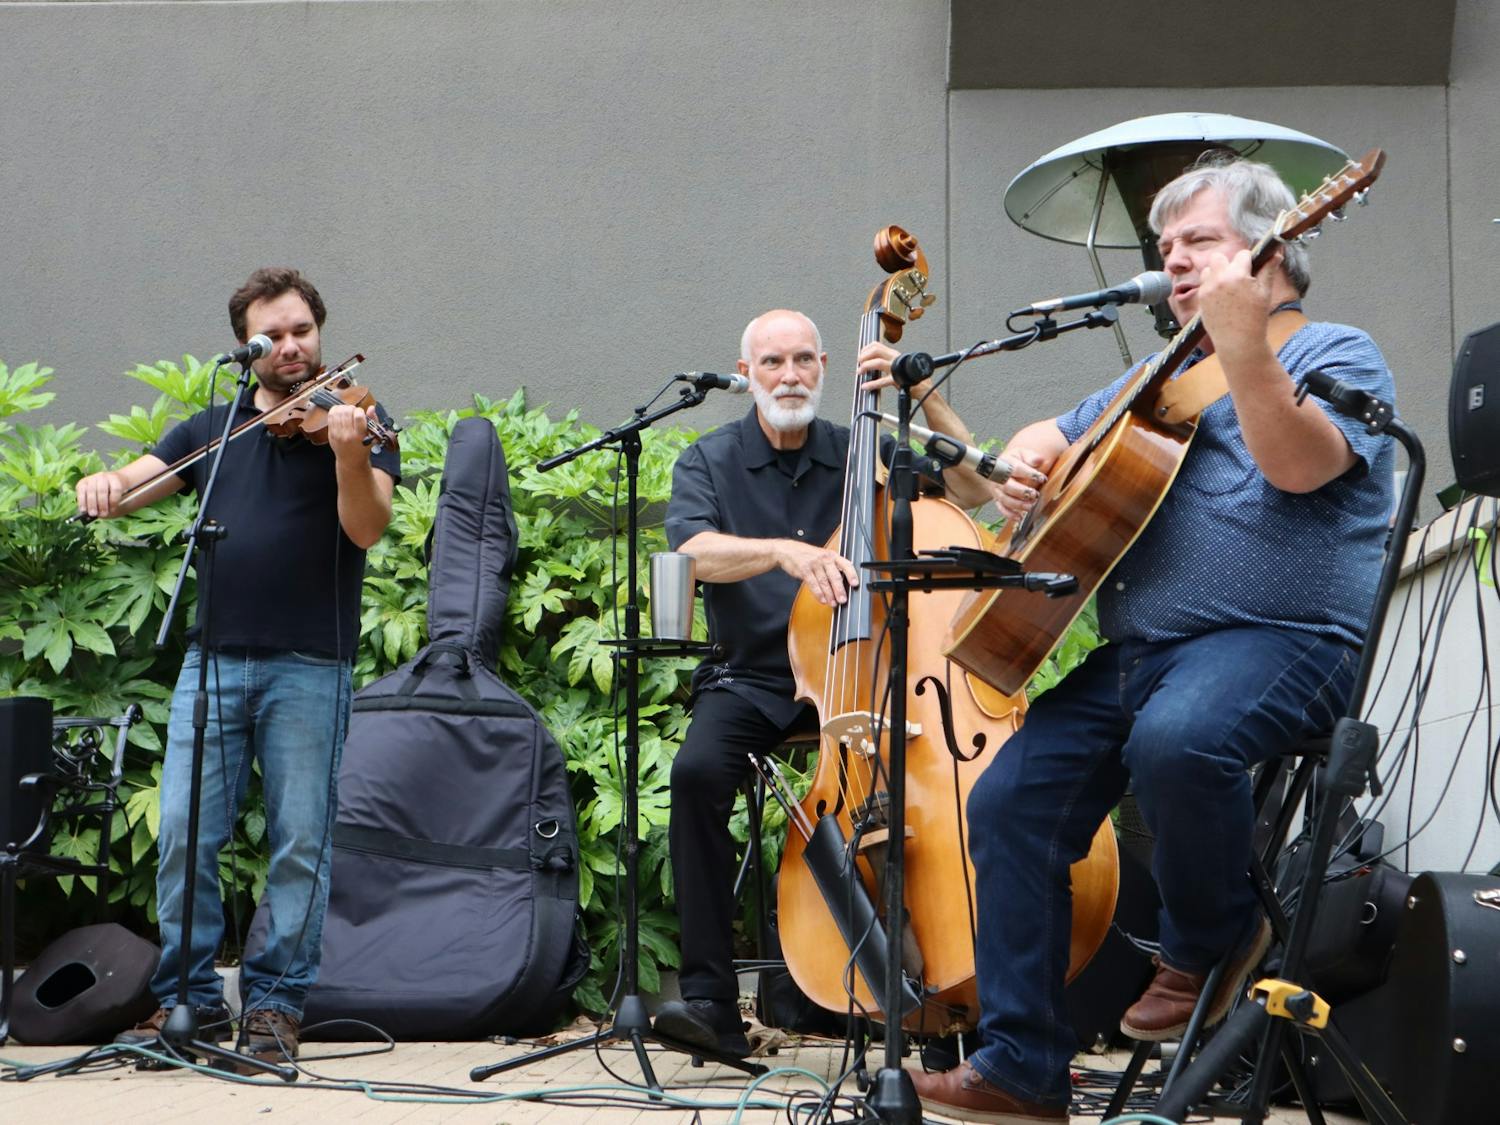 The Randy Lucas Trio performs bluegrass jazz at Bourbon Restaurant on May 26, 2022. The performance is a part of the "Jack-n-Jazz" series occurring every Thursday until the end of June.&nbsp;